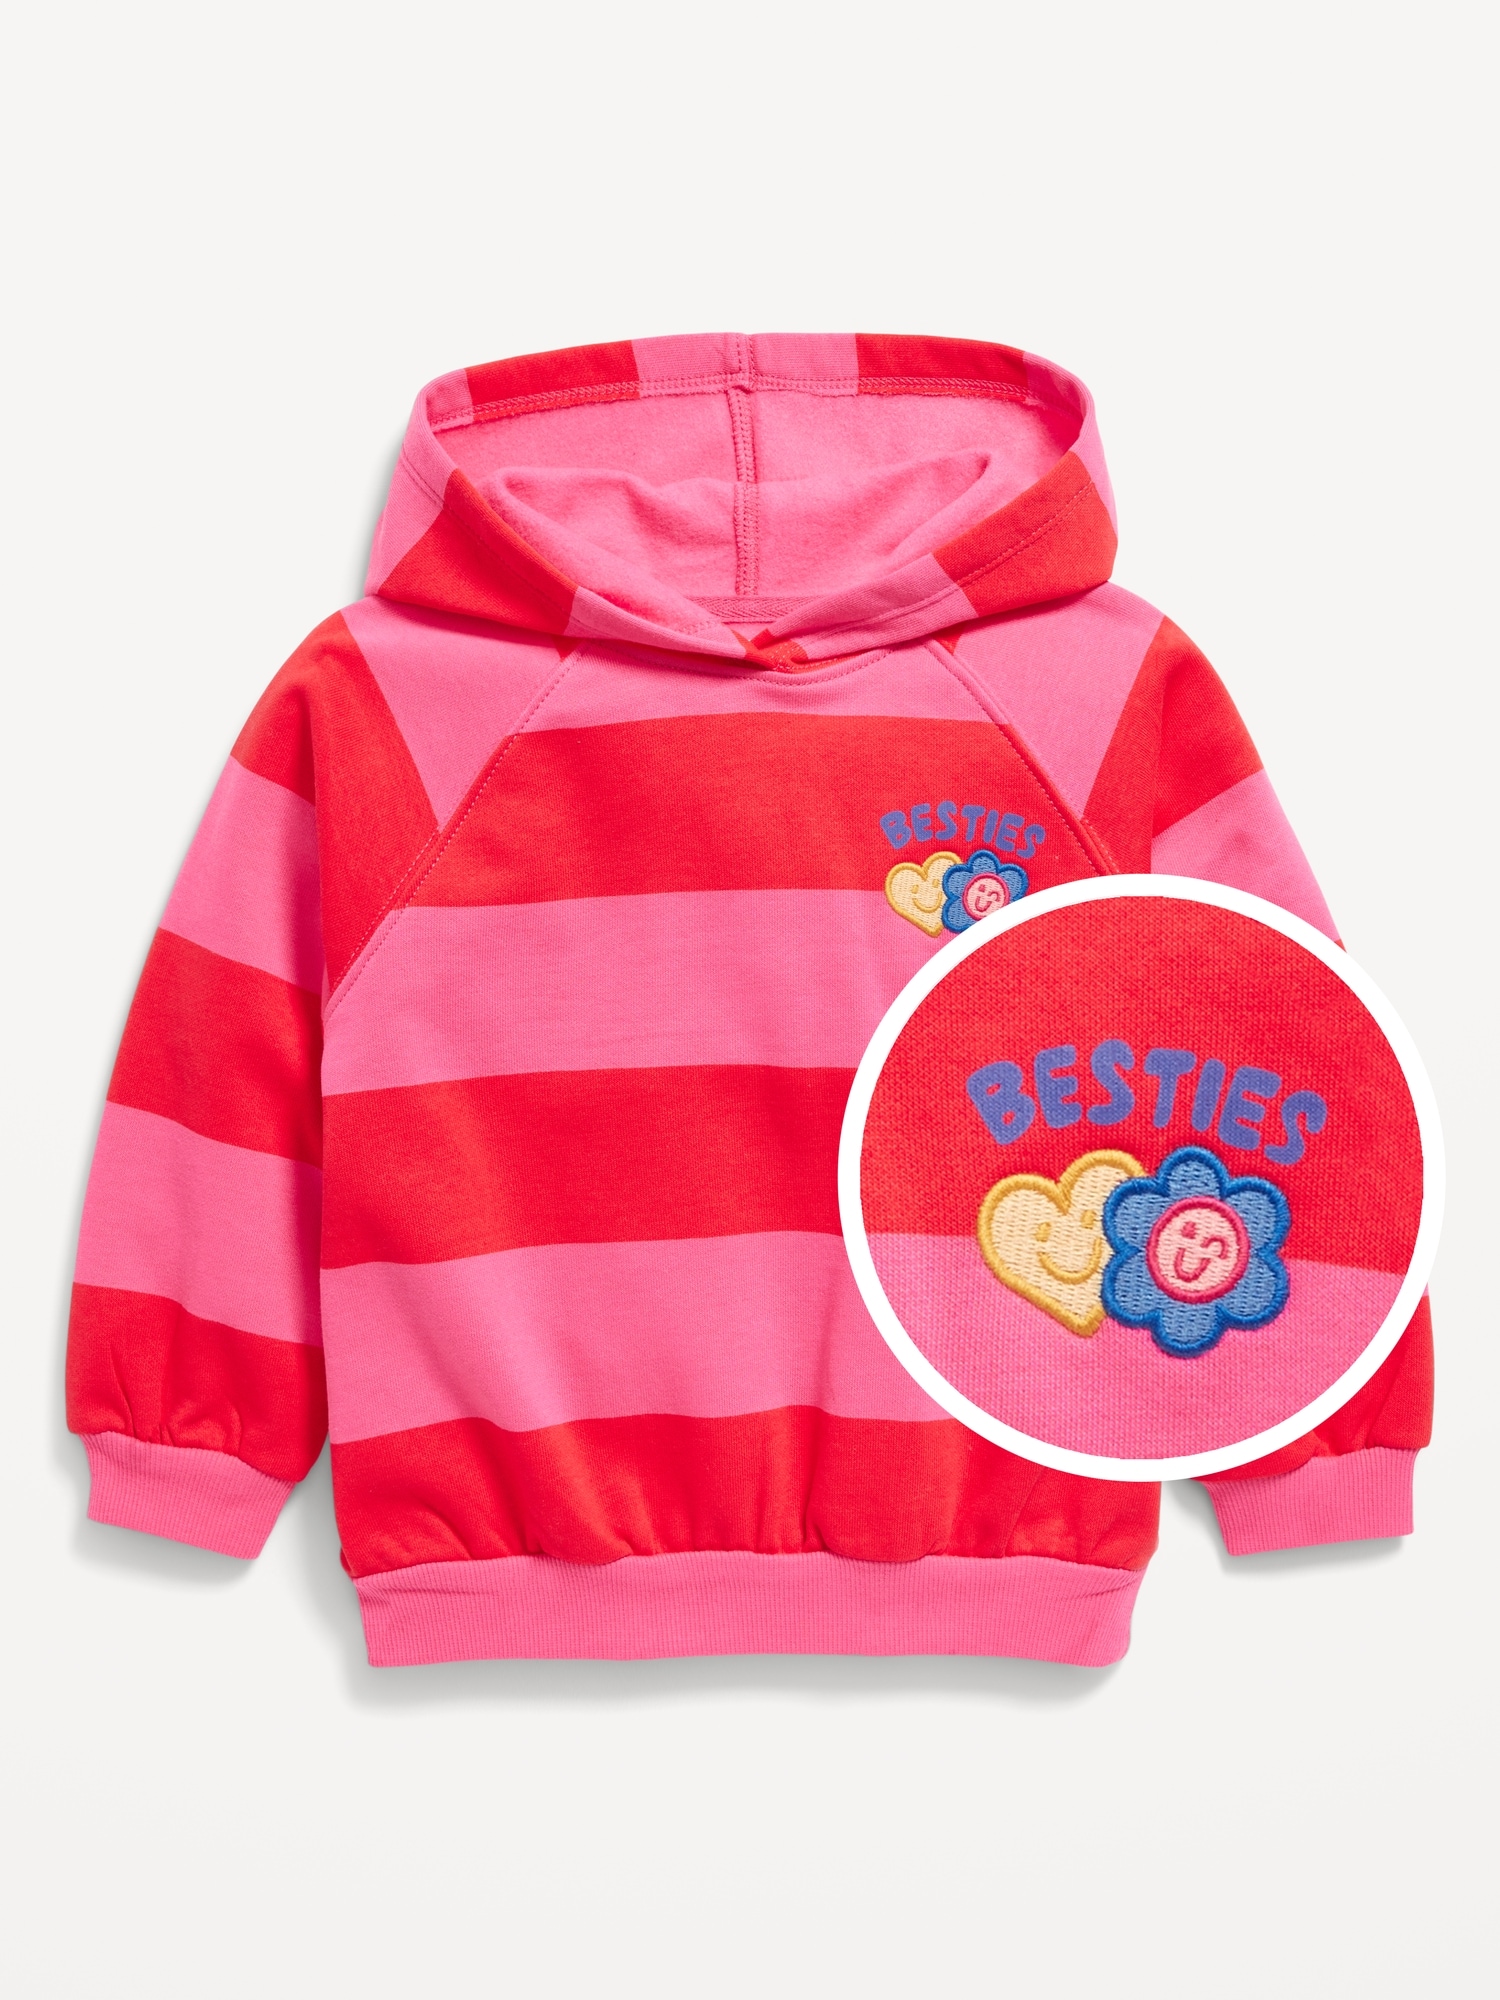 Long-Sleeve Graphic Pullover Hoodie for Toddler Girls